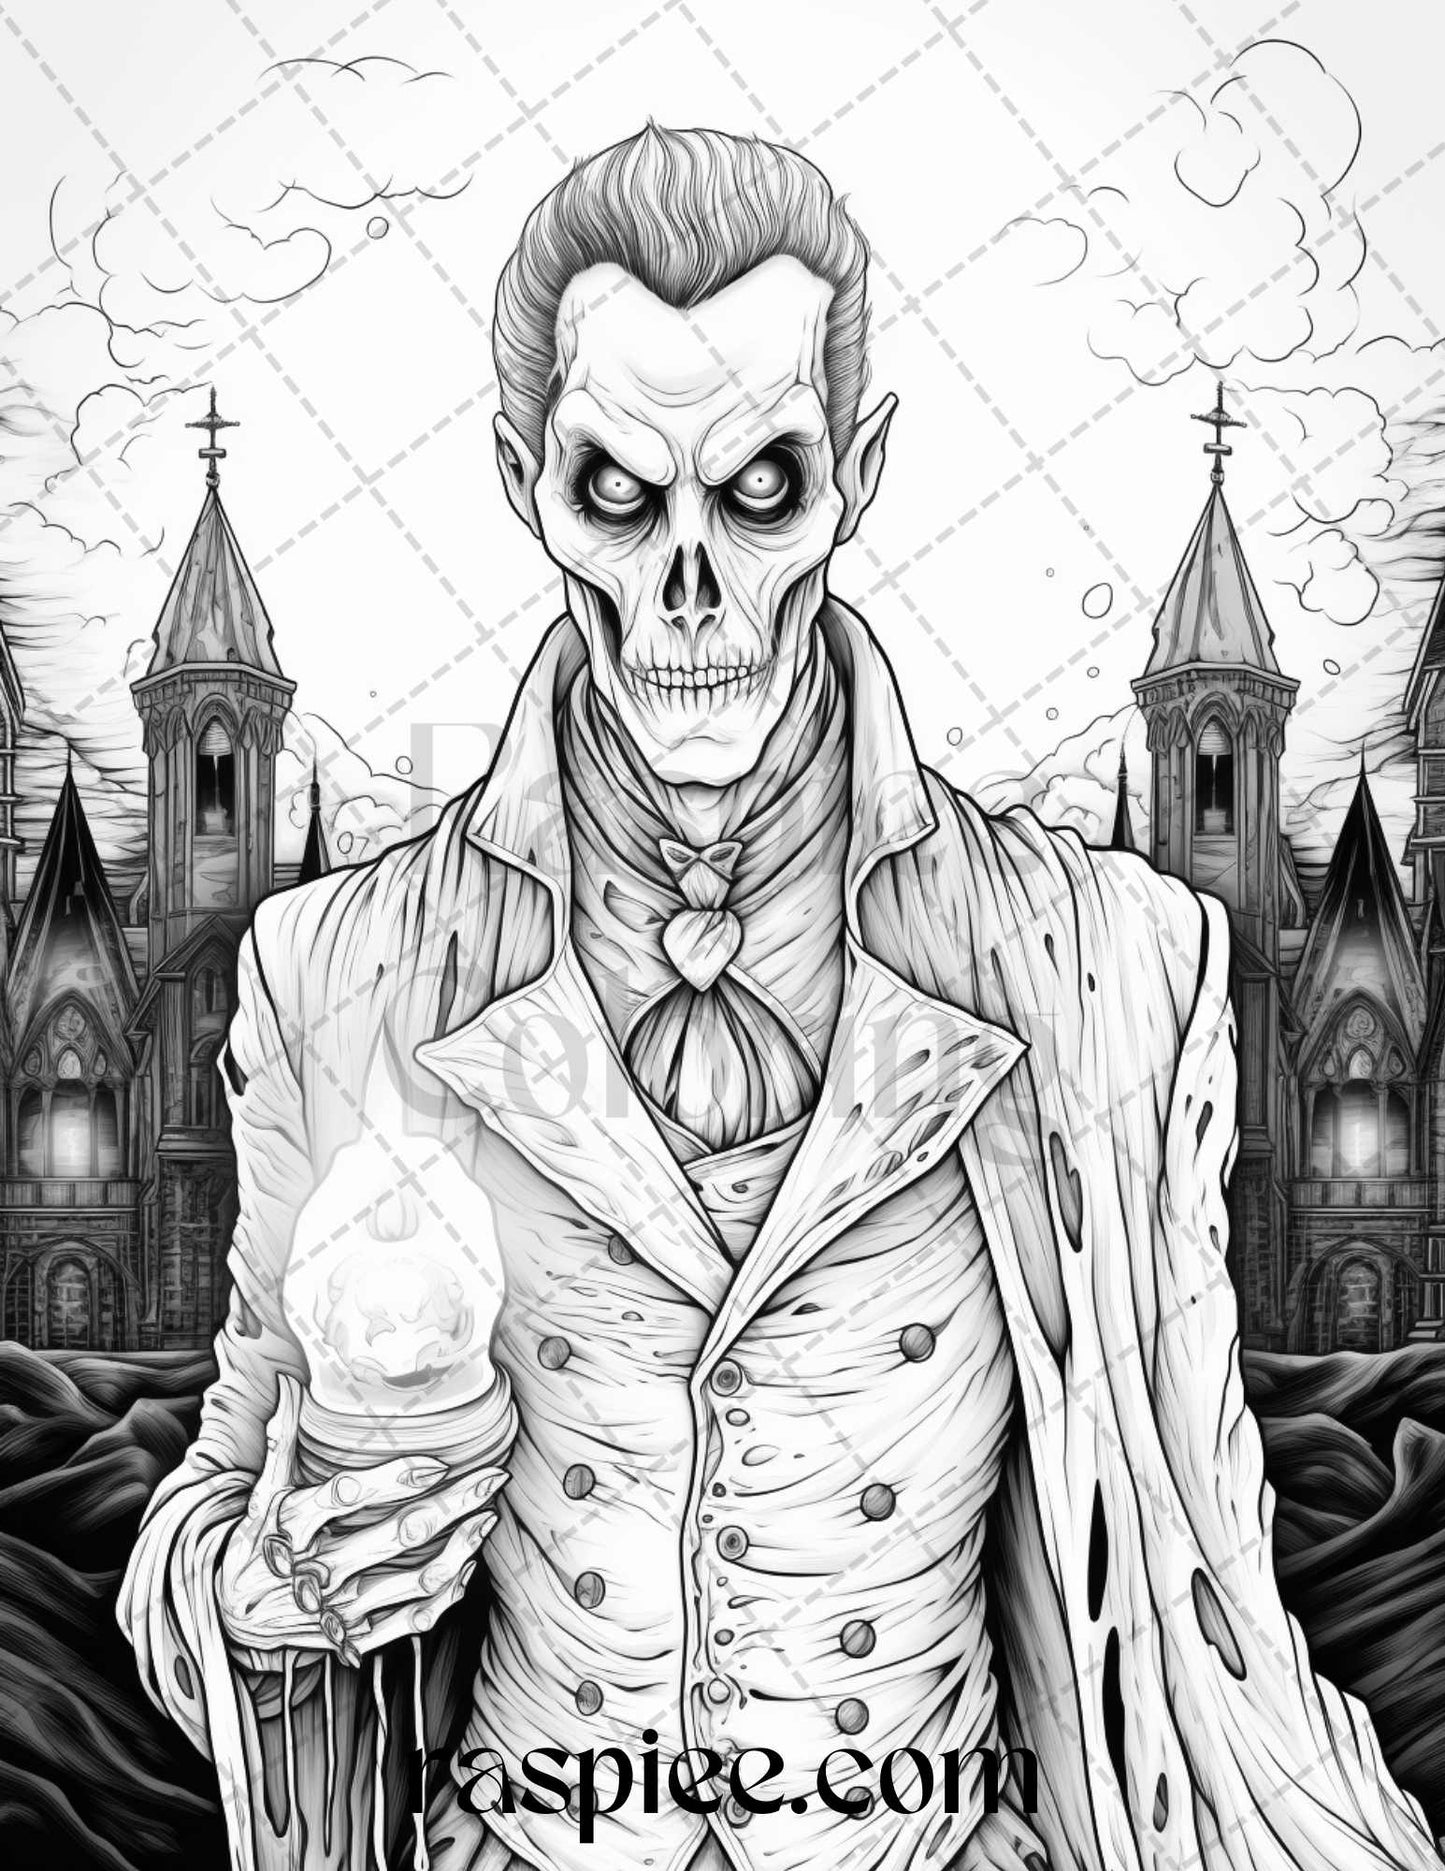 60 Halloween Vampire Grayscale Coloring Pages Printable for Adults, PDF File Instant Download